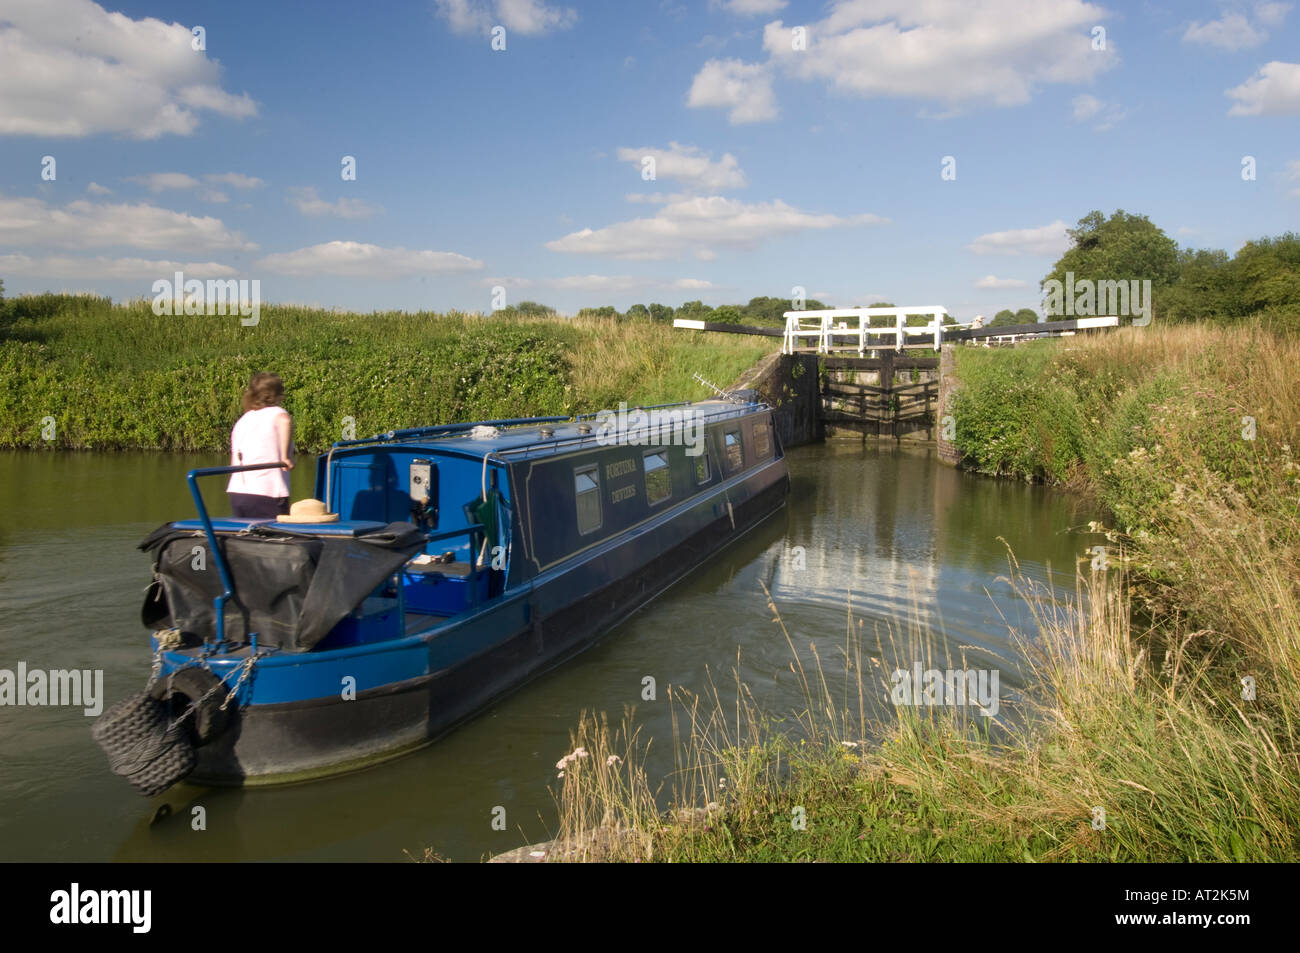 A woman steering the British narrowboat Fortuna at Caen hill locks on the Kennet & Avon canal, Devizes, Wiltshire, UK Stock Photo